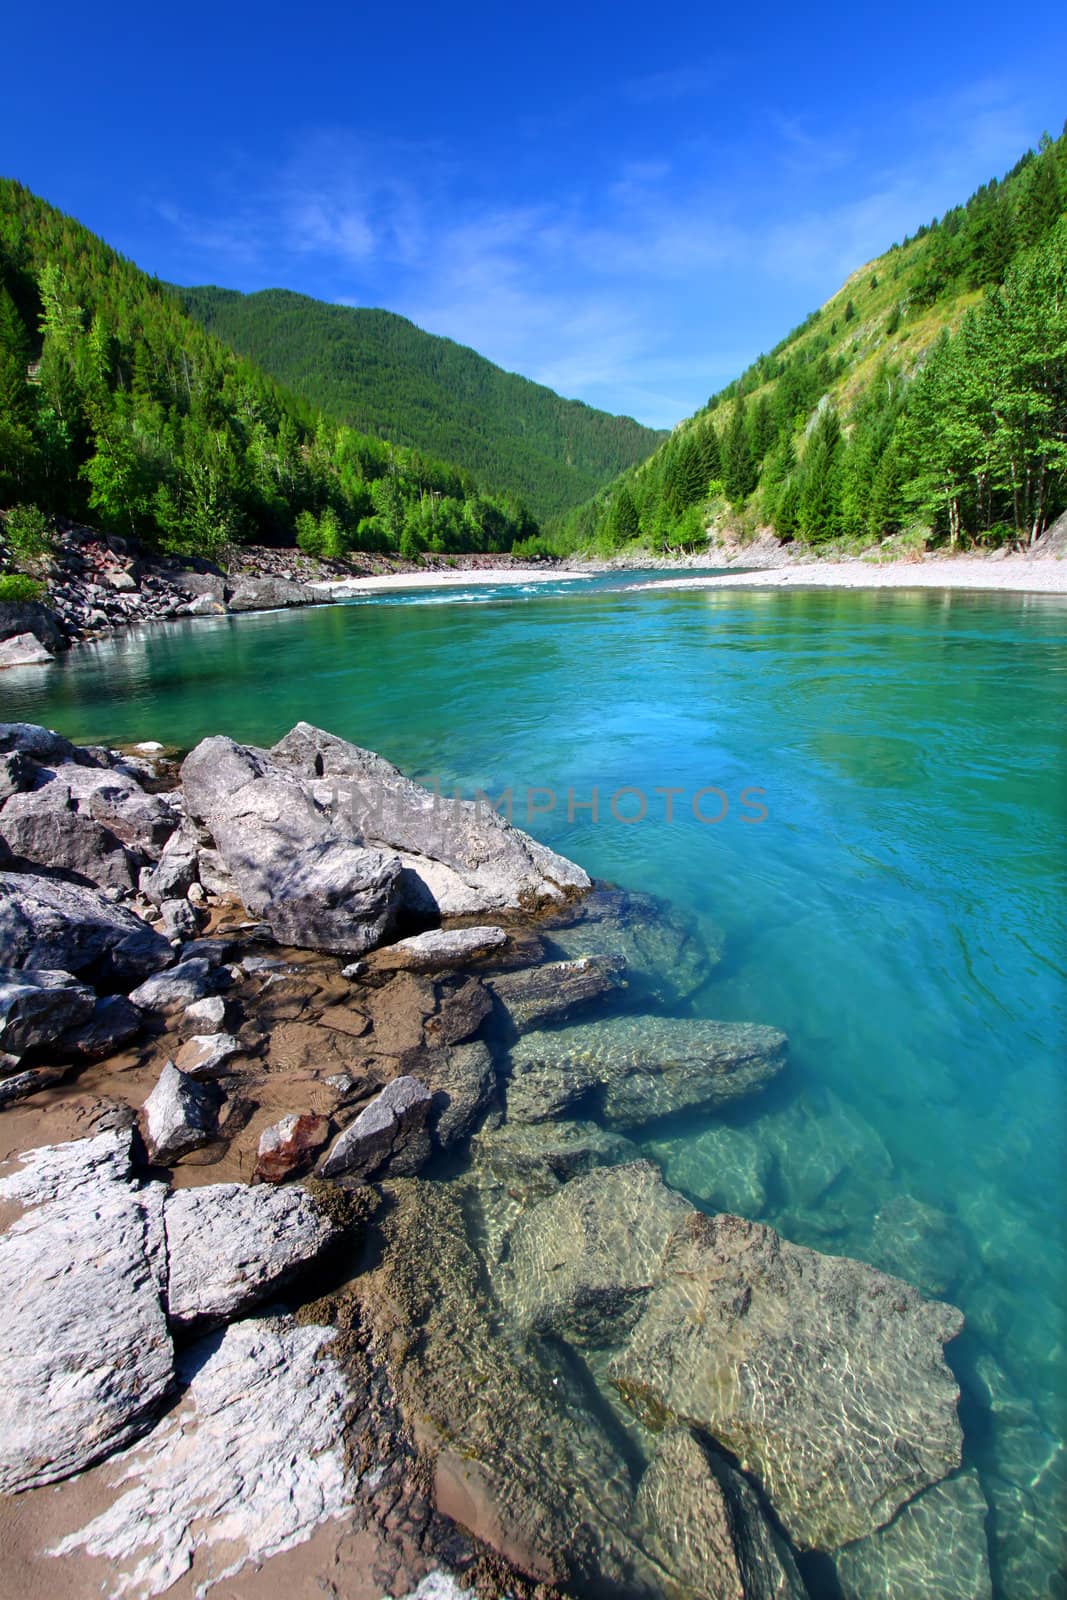 Bright turquoise waters of the Middle Fork Flathead River in the Lewis and Clark National Forest of Montana.